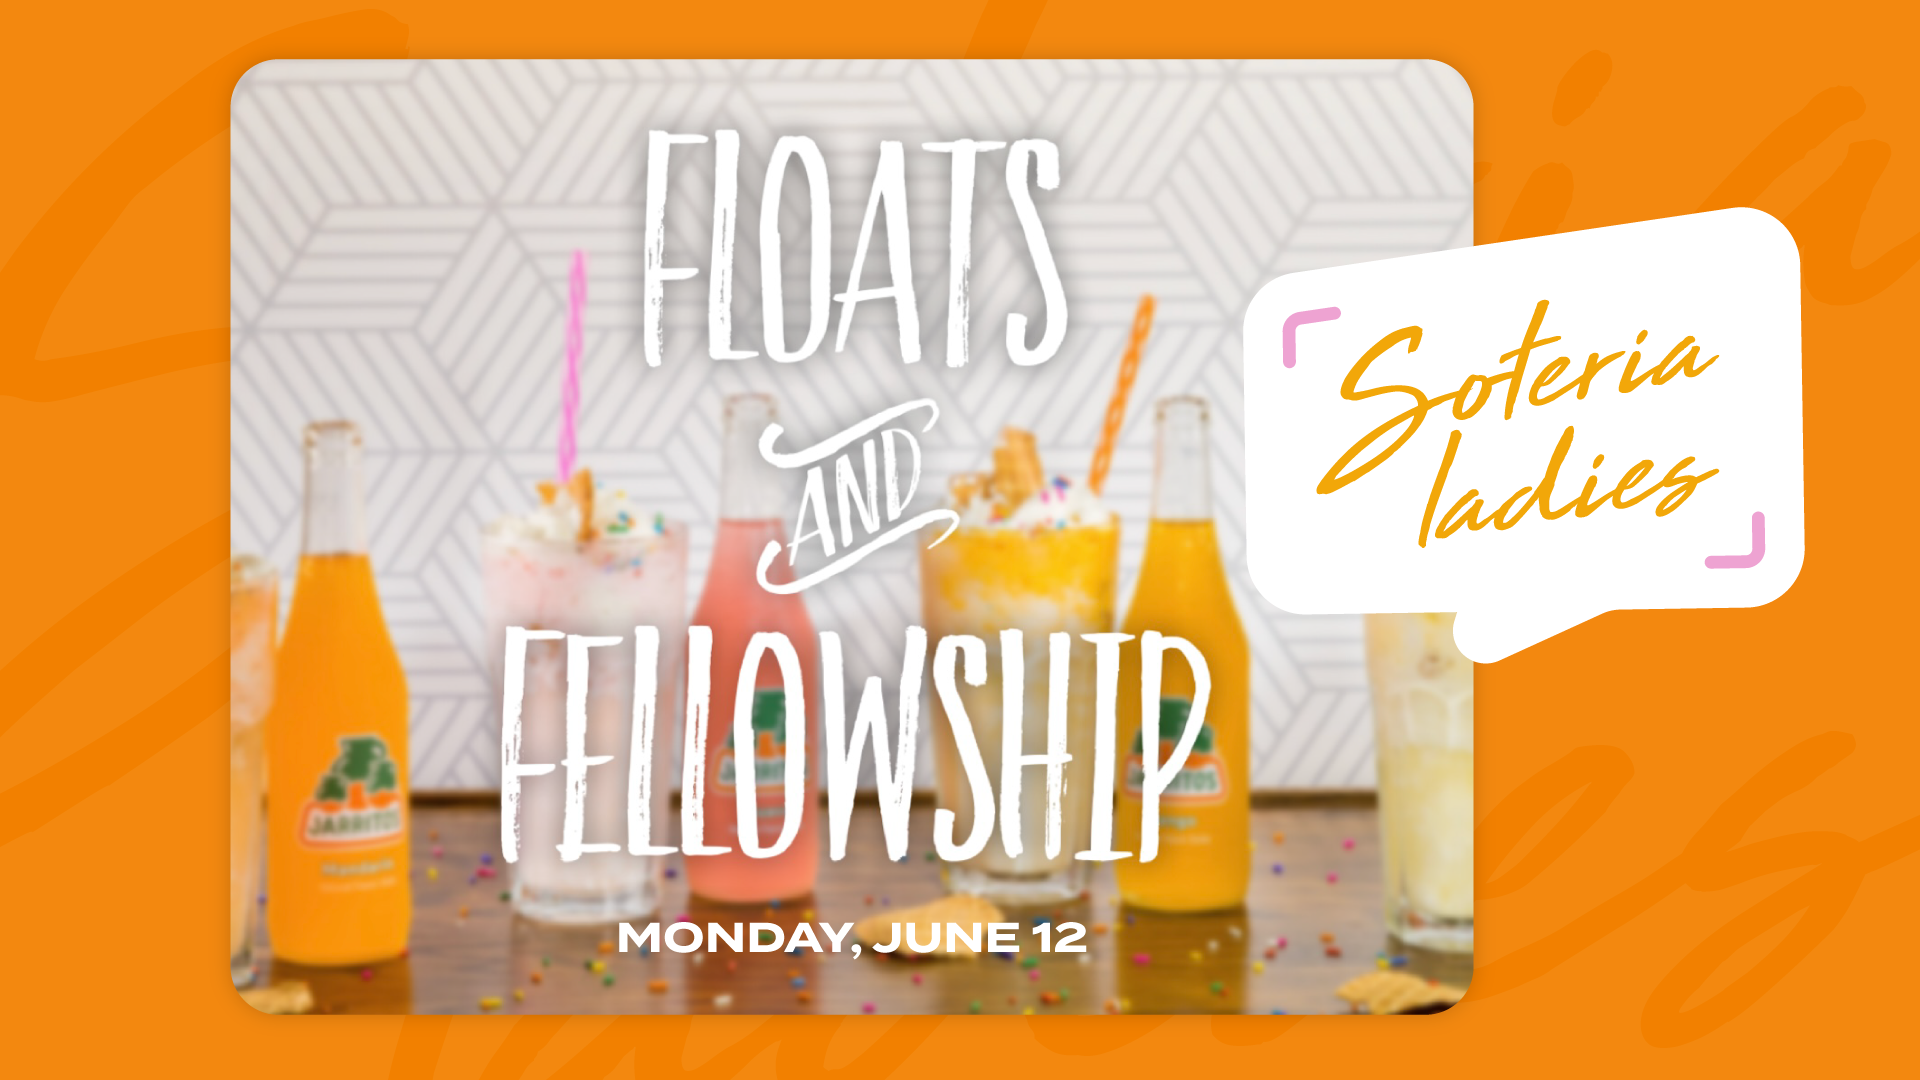 Floats and Fellowship